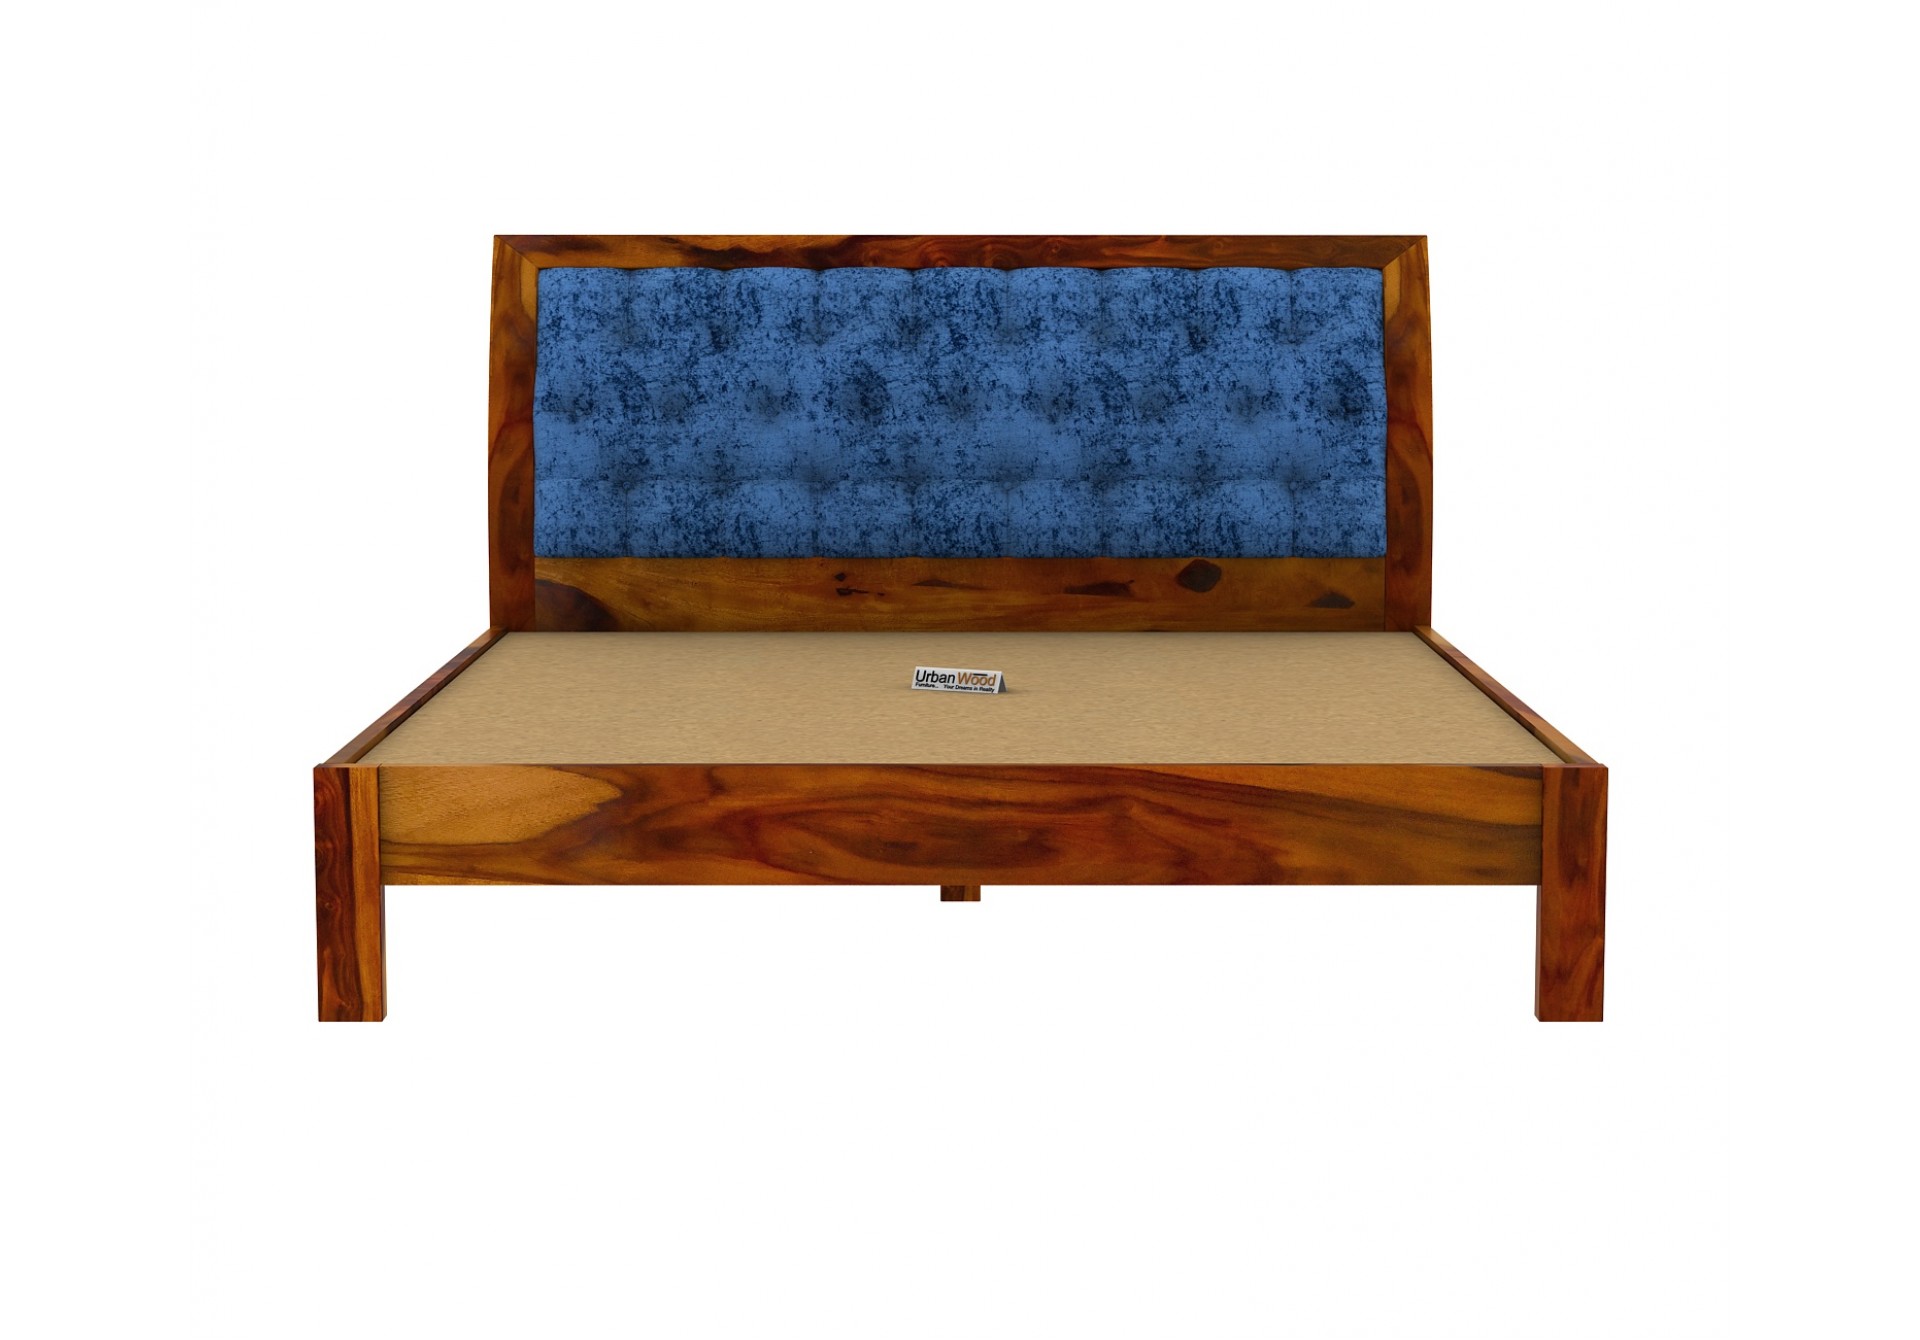 Ross Wooden Bed Without storage (Queen Size, Honey Finish)